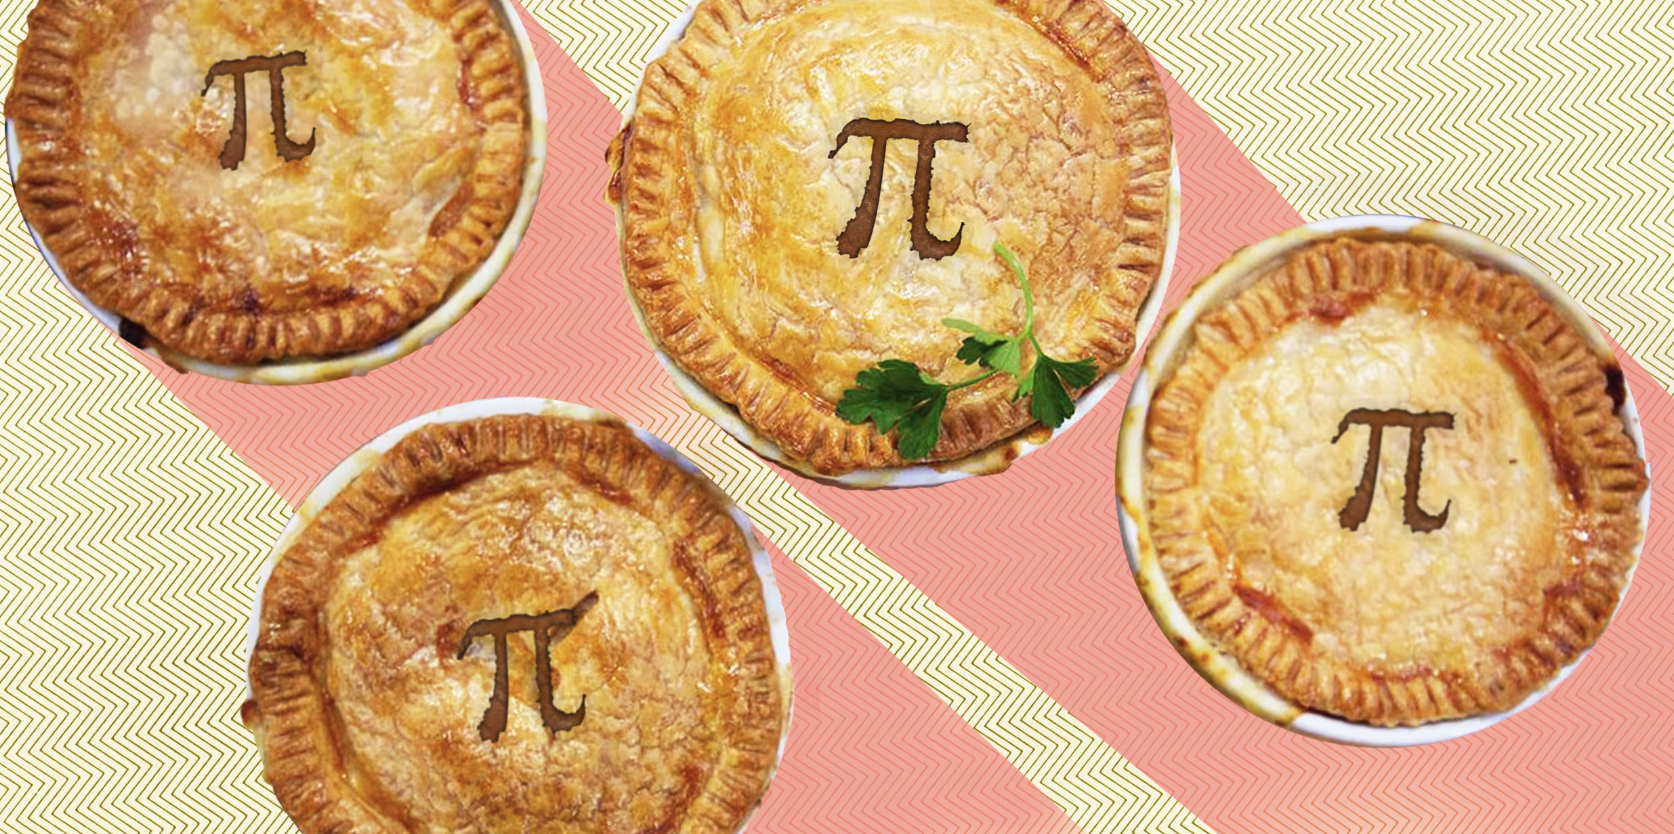 Four Pies with the Pi symbol on each over a pink and pale yellow background.